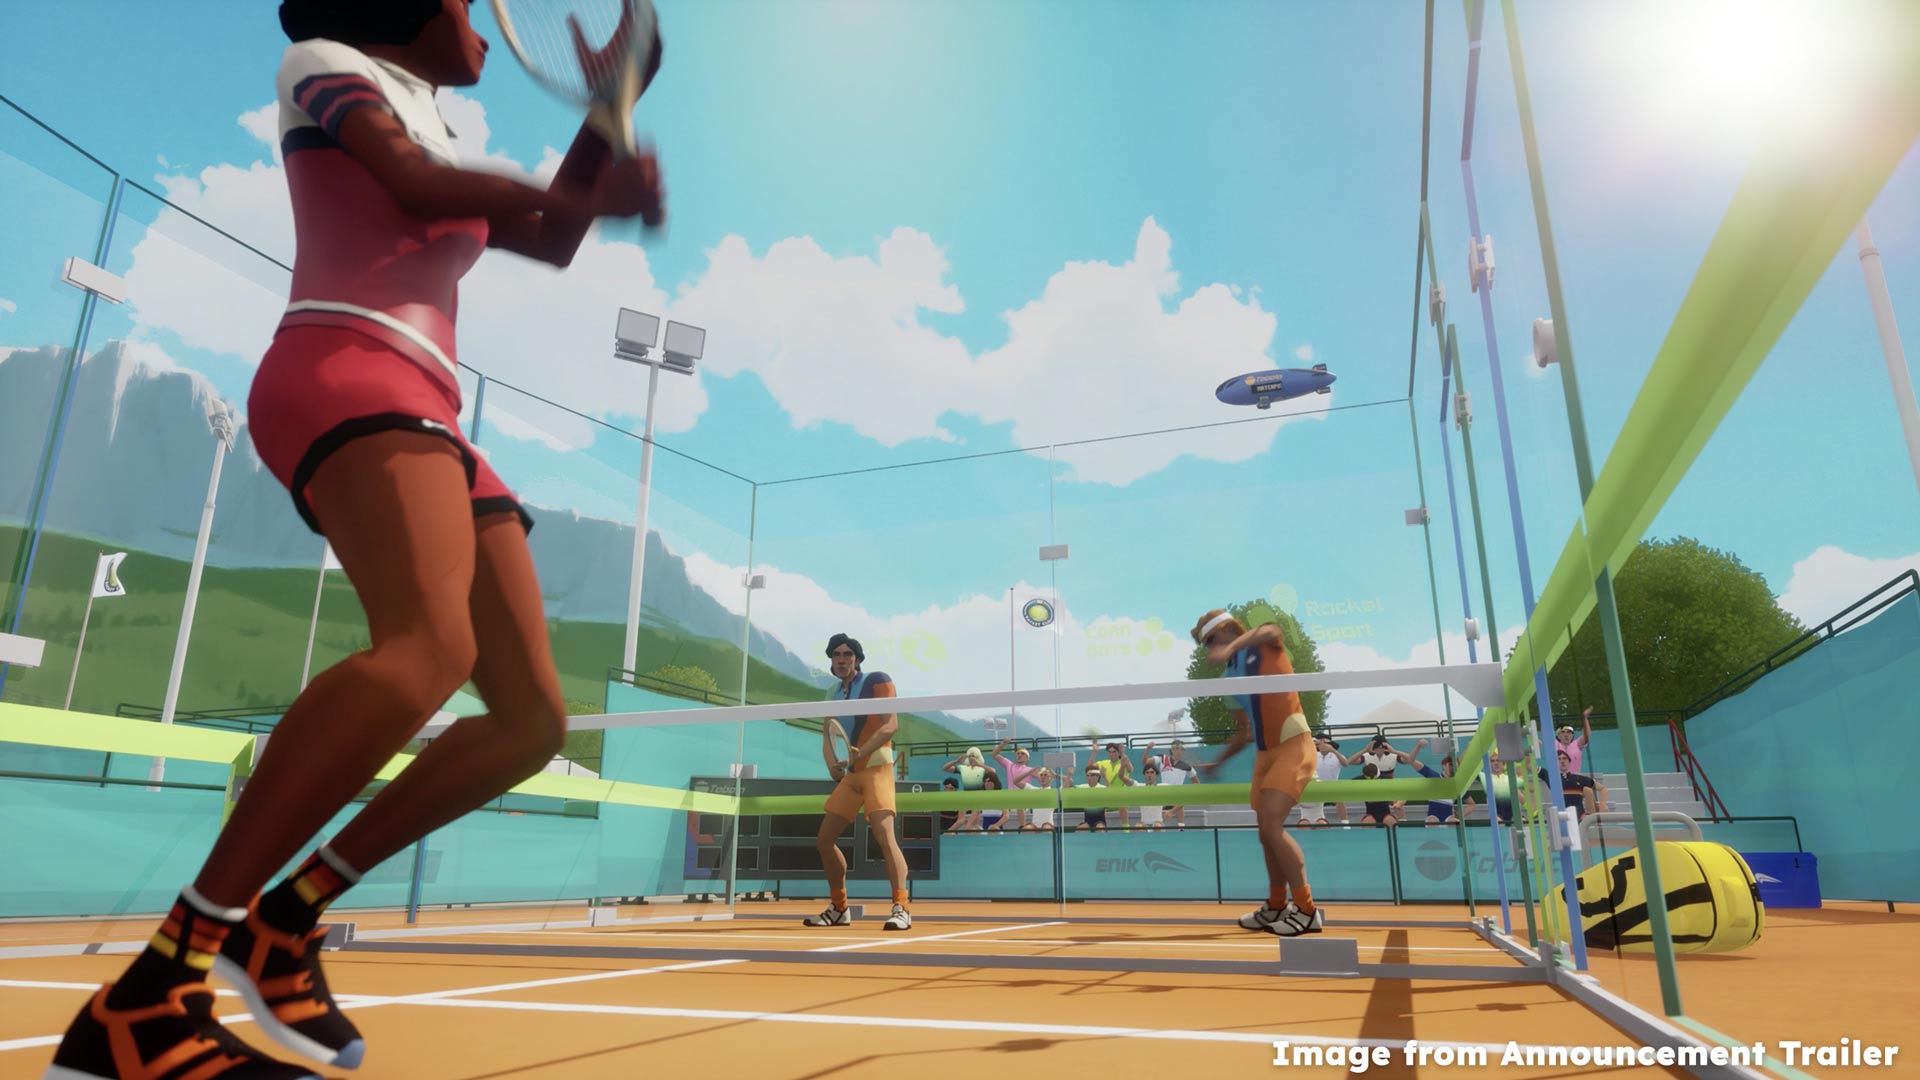 ‘Racket Club’ Looks Like a VR Cross Between Pickleball and Squash, Trailer Here – Road to VR